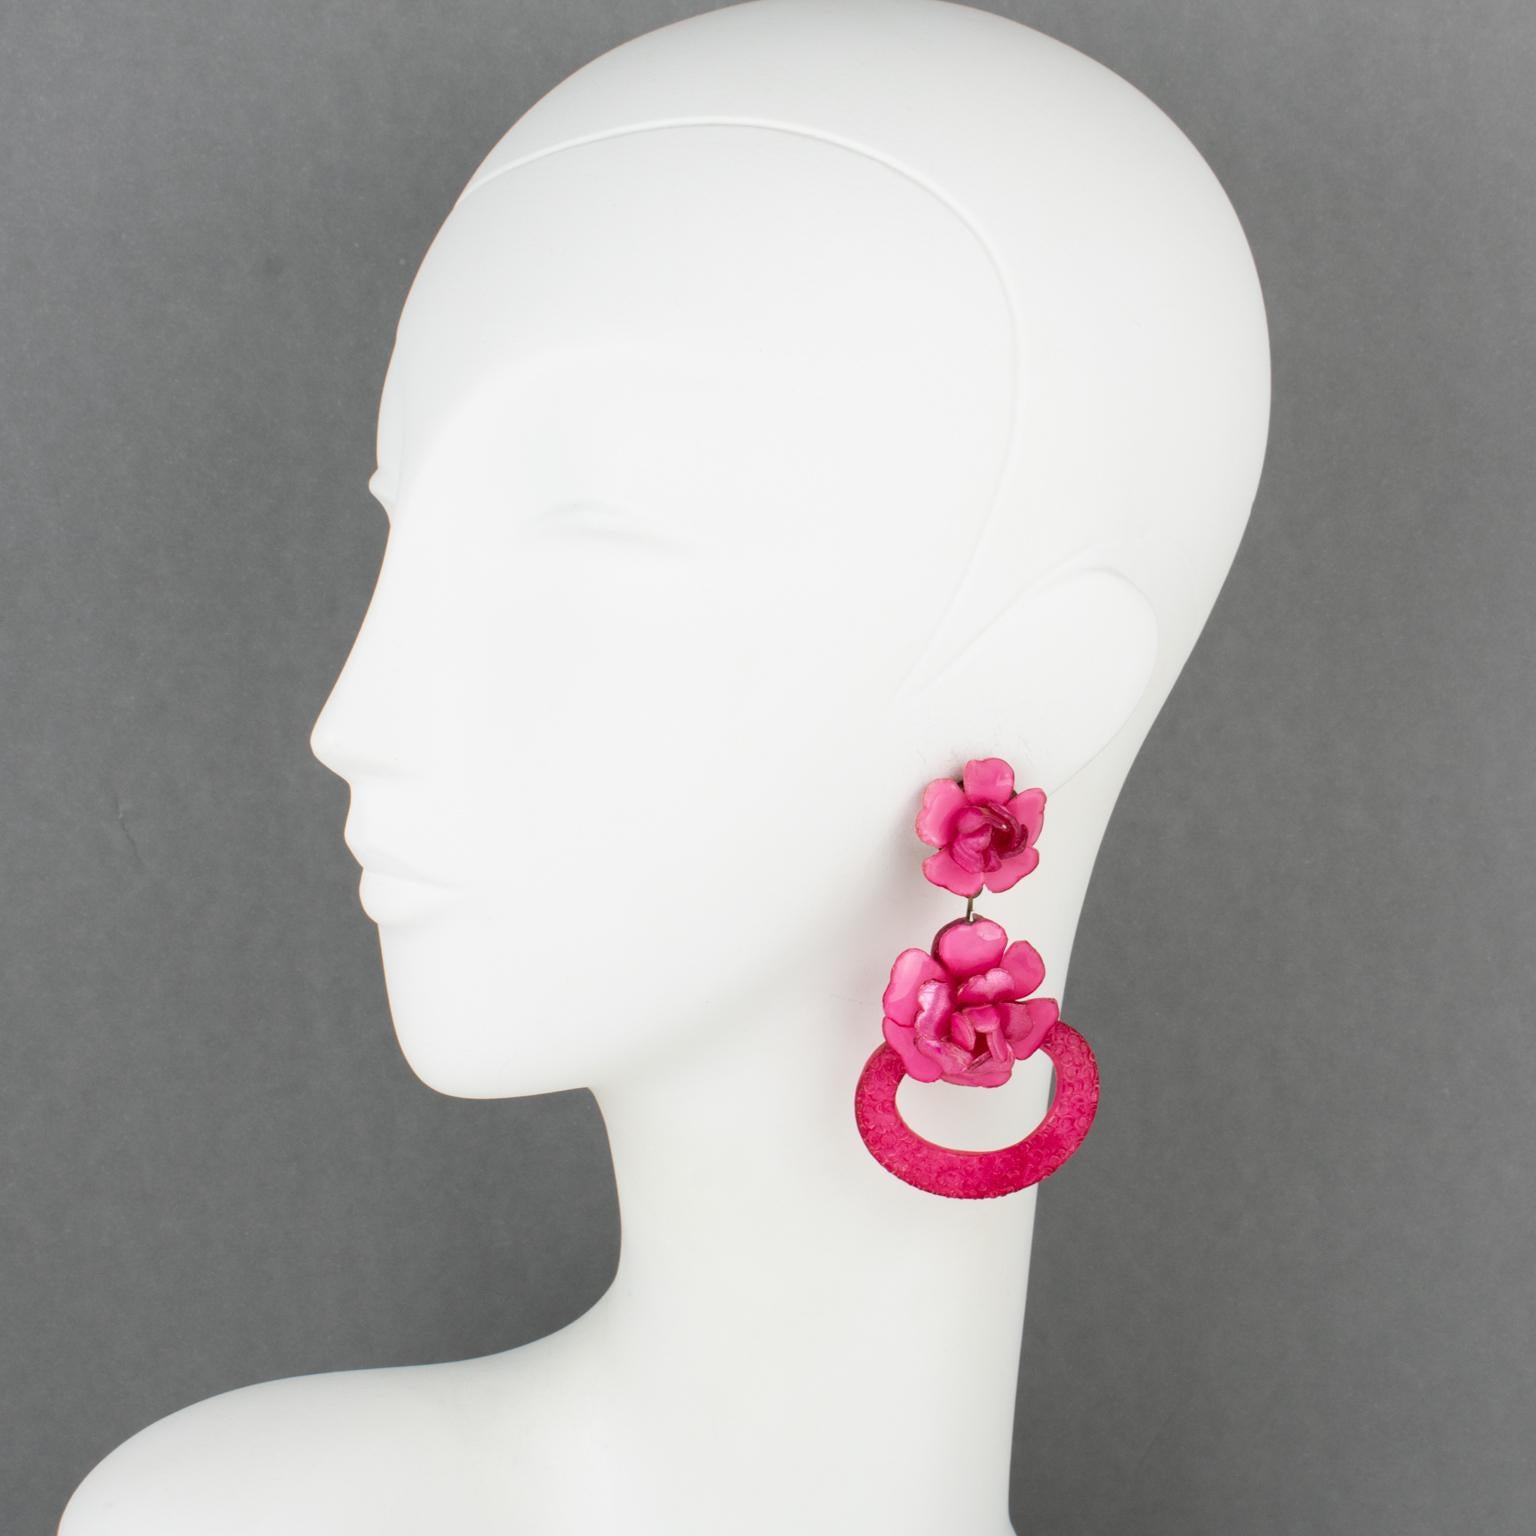 These clip-on earrings by Cilea Paris for designer Francoise Montague are stunning. The pieces feature a dimensional hand-made dangle-drop shape in fuchsia pink-colored resin shaped as rose flowers. The assorted carved and textured patterns are used